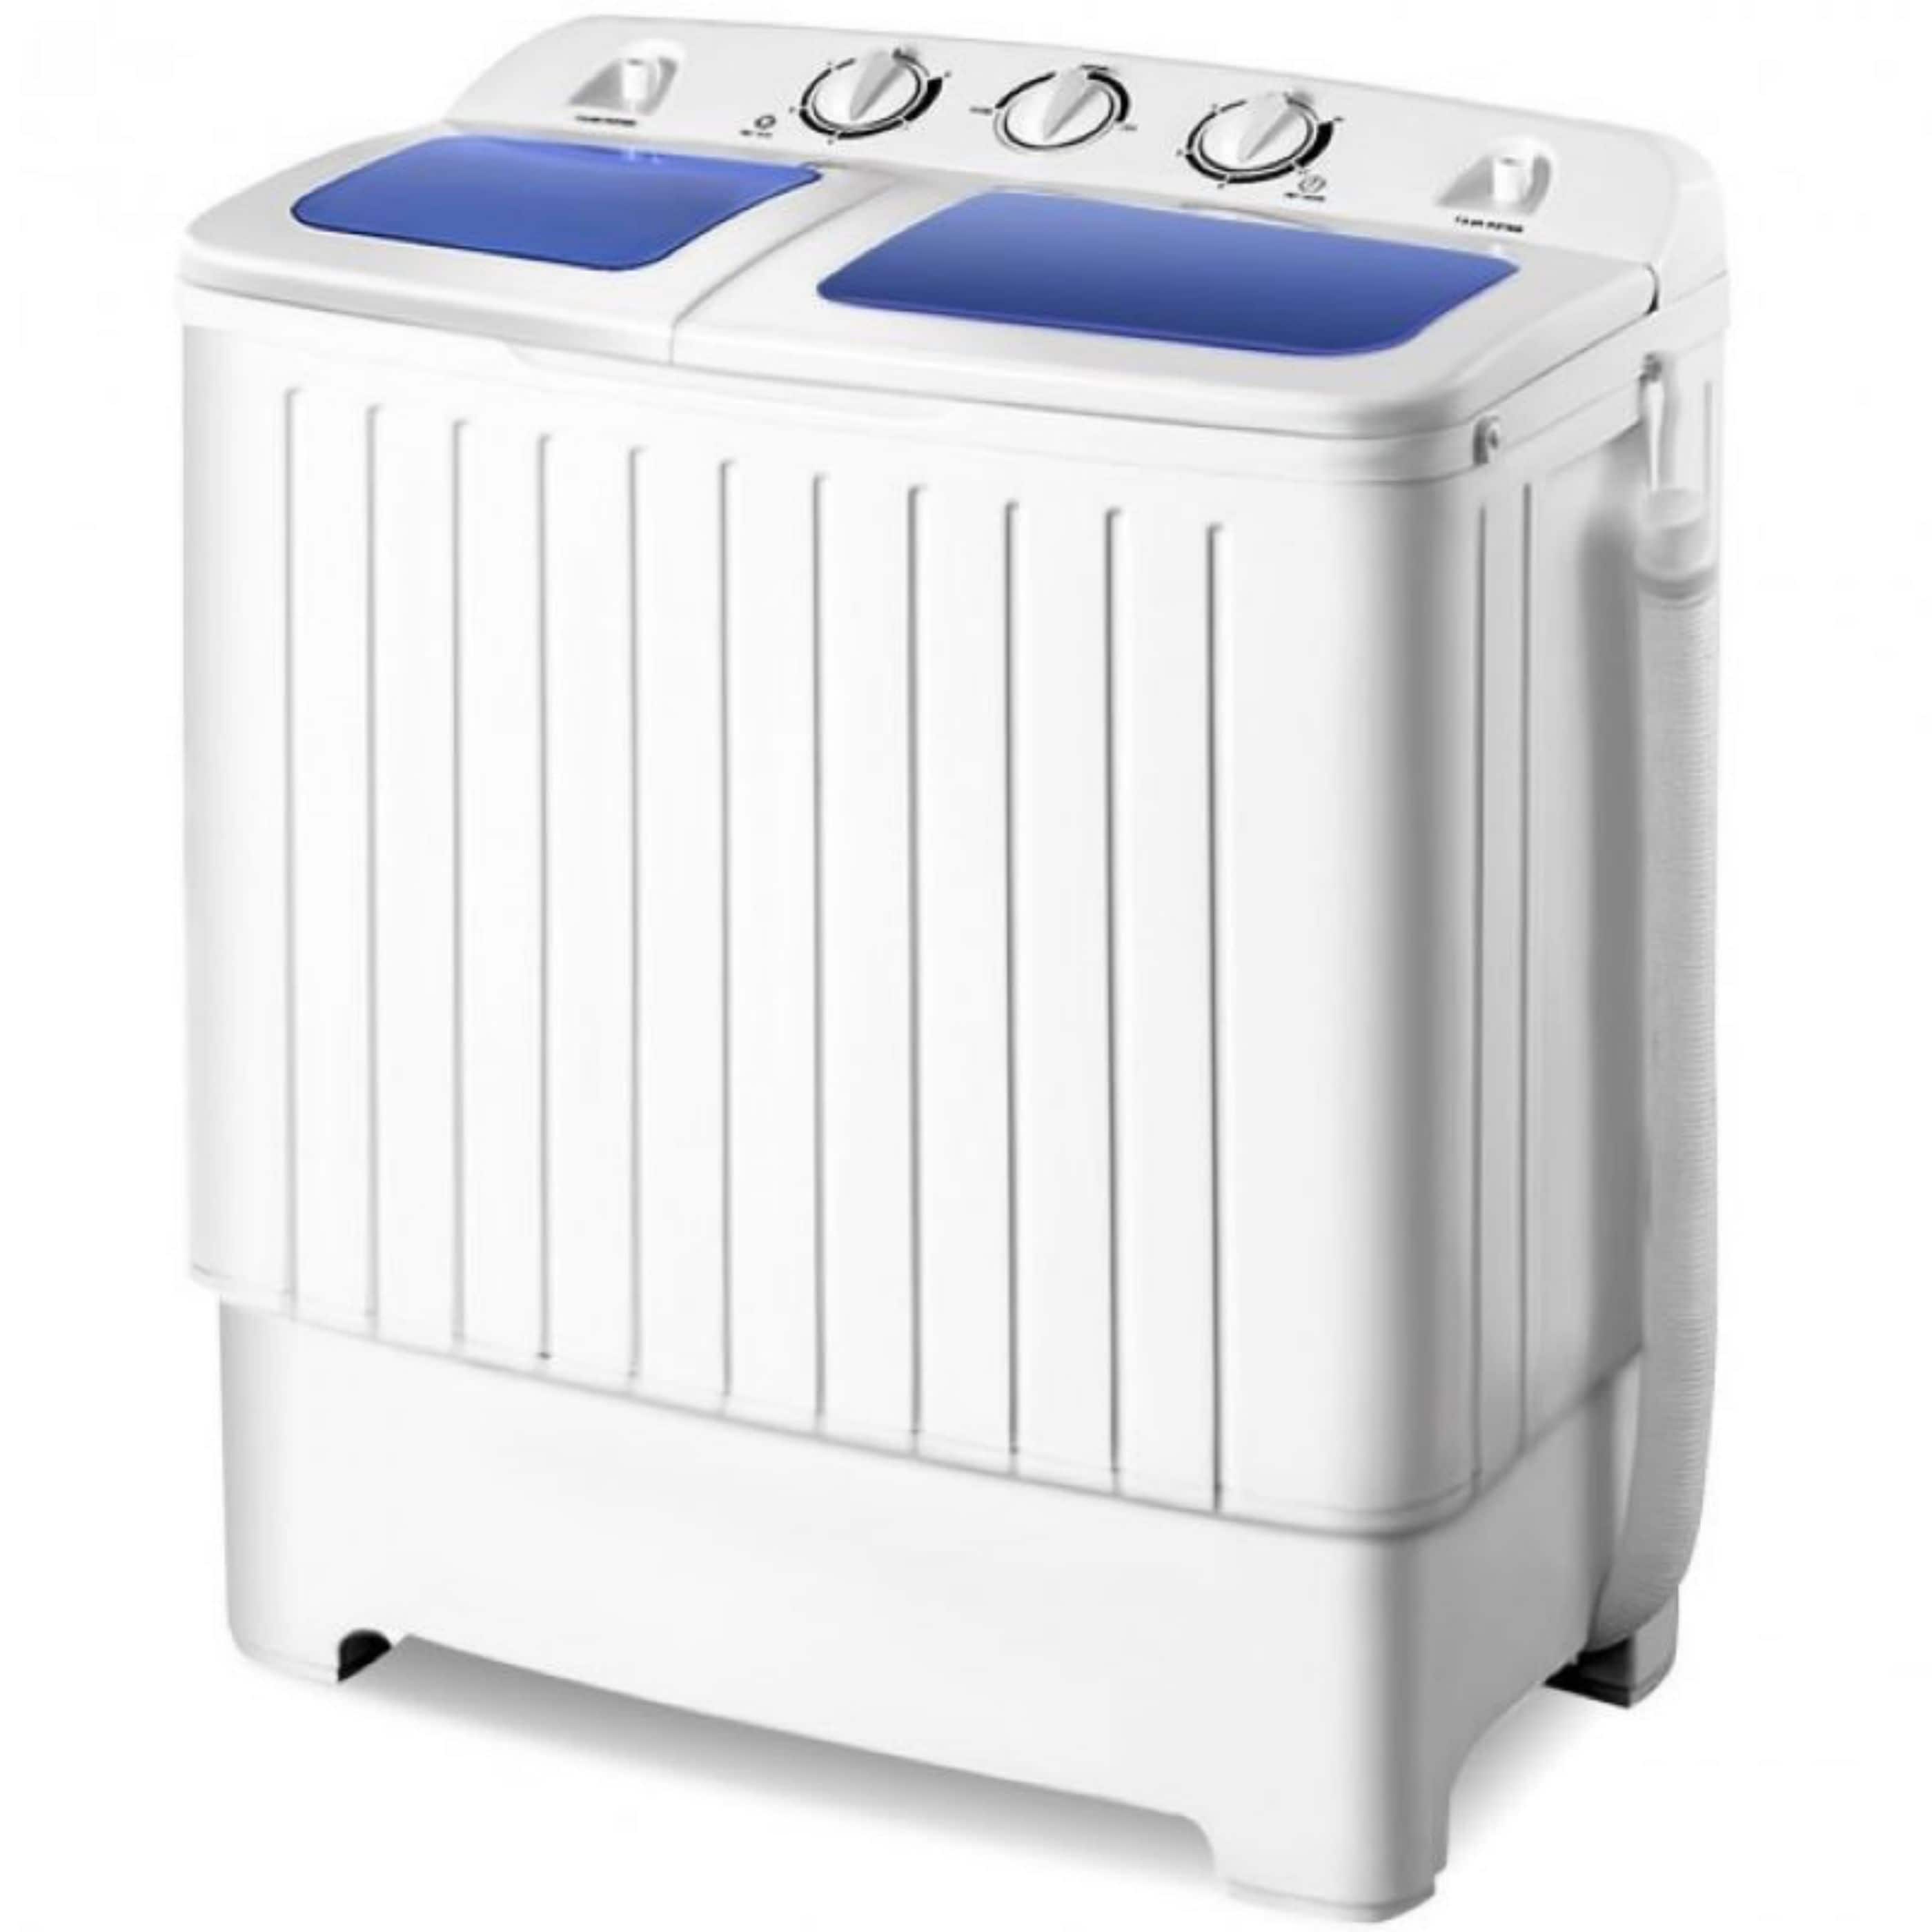 https://ak1.ostkcdn.com/images/products/is/images/direct/f8a81ba98cd1fac179f63c29f6e377caf73242d6/Apartments-Compact-Twin-Tub-Spin-Washing-Machine-Dryer.jpg